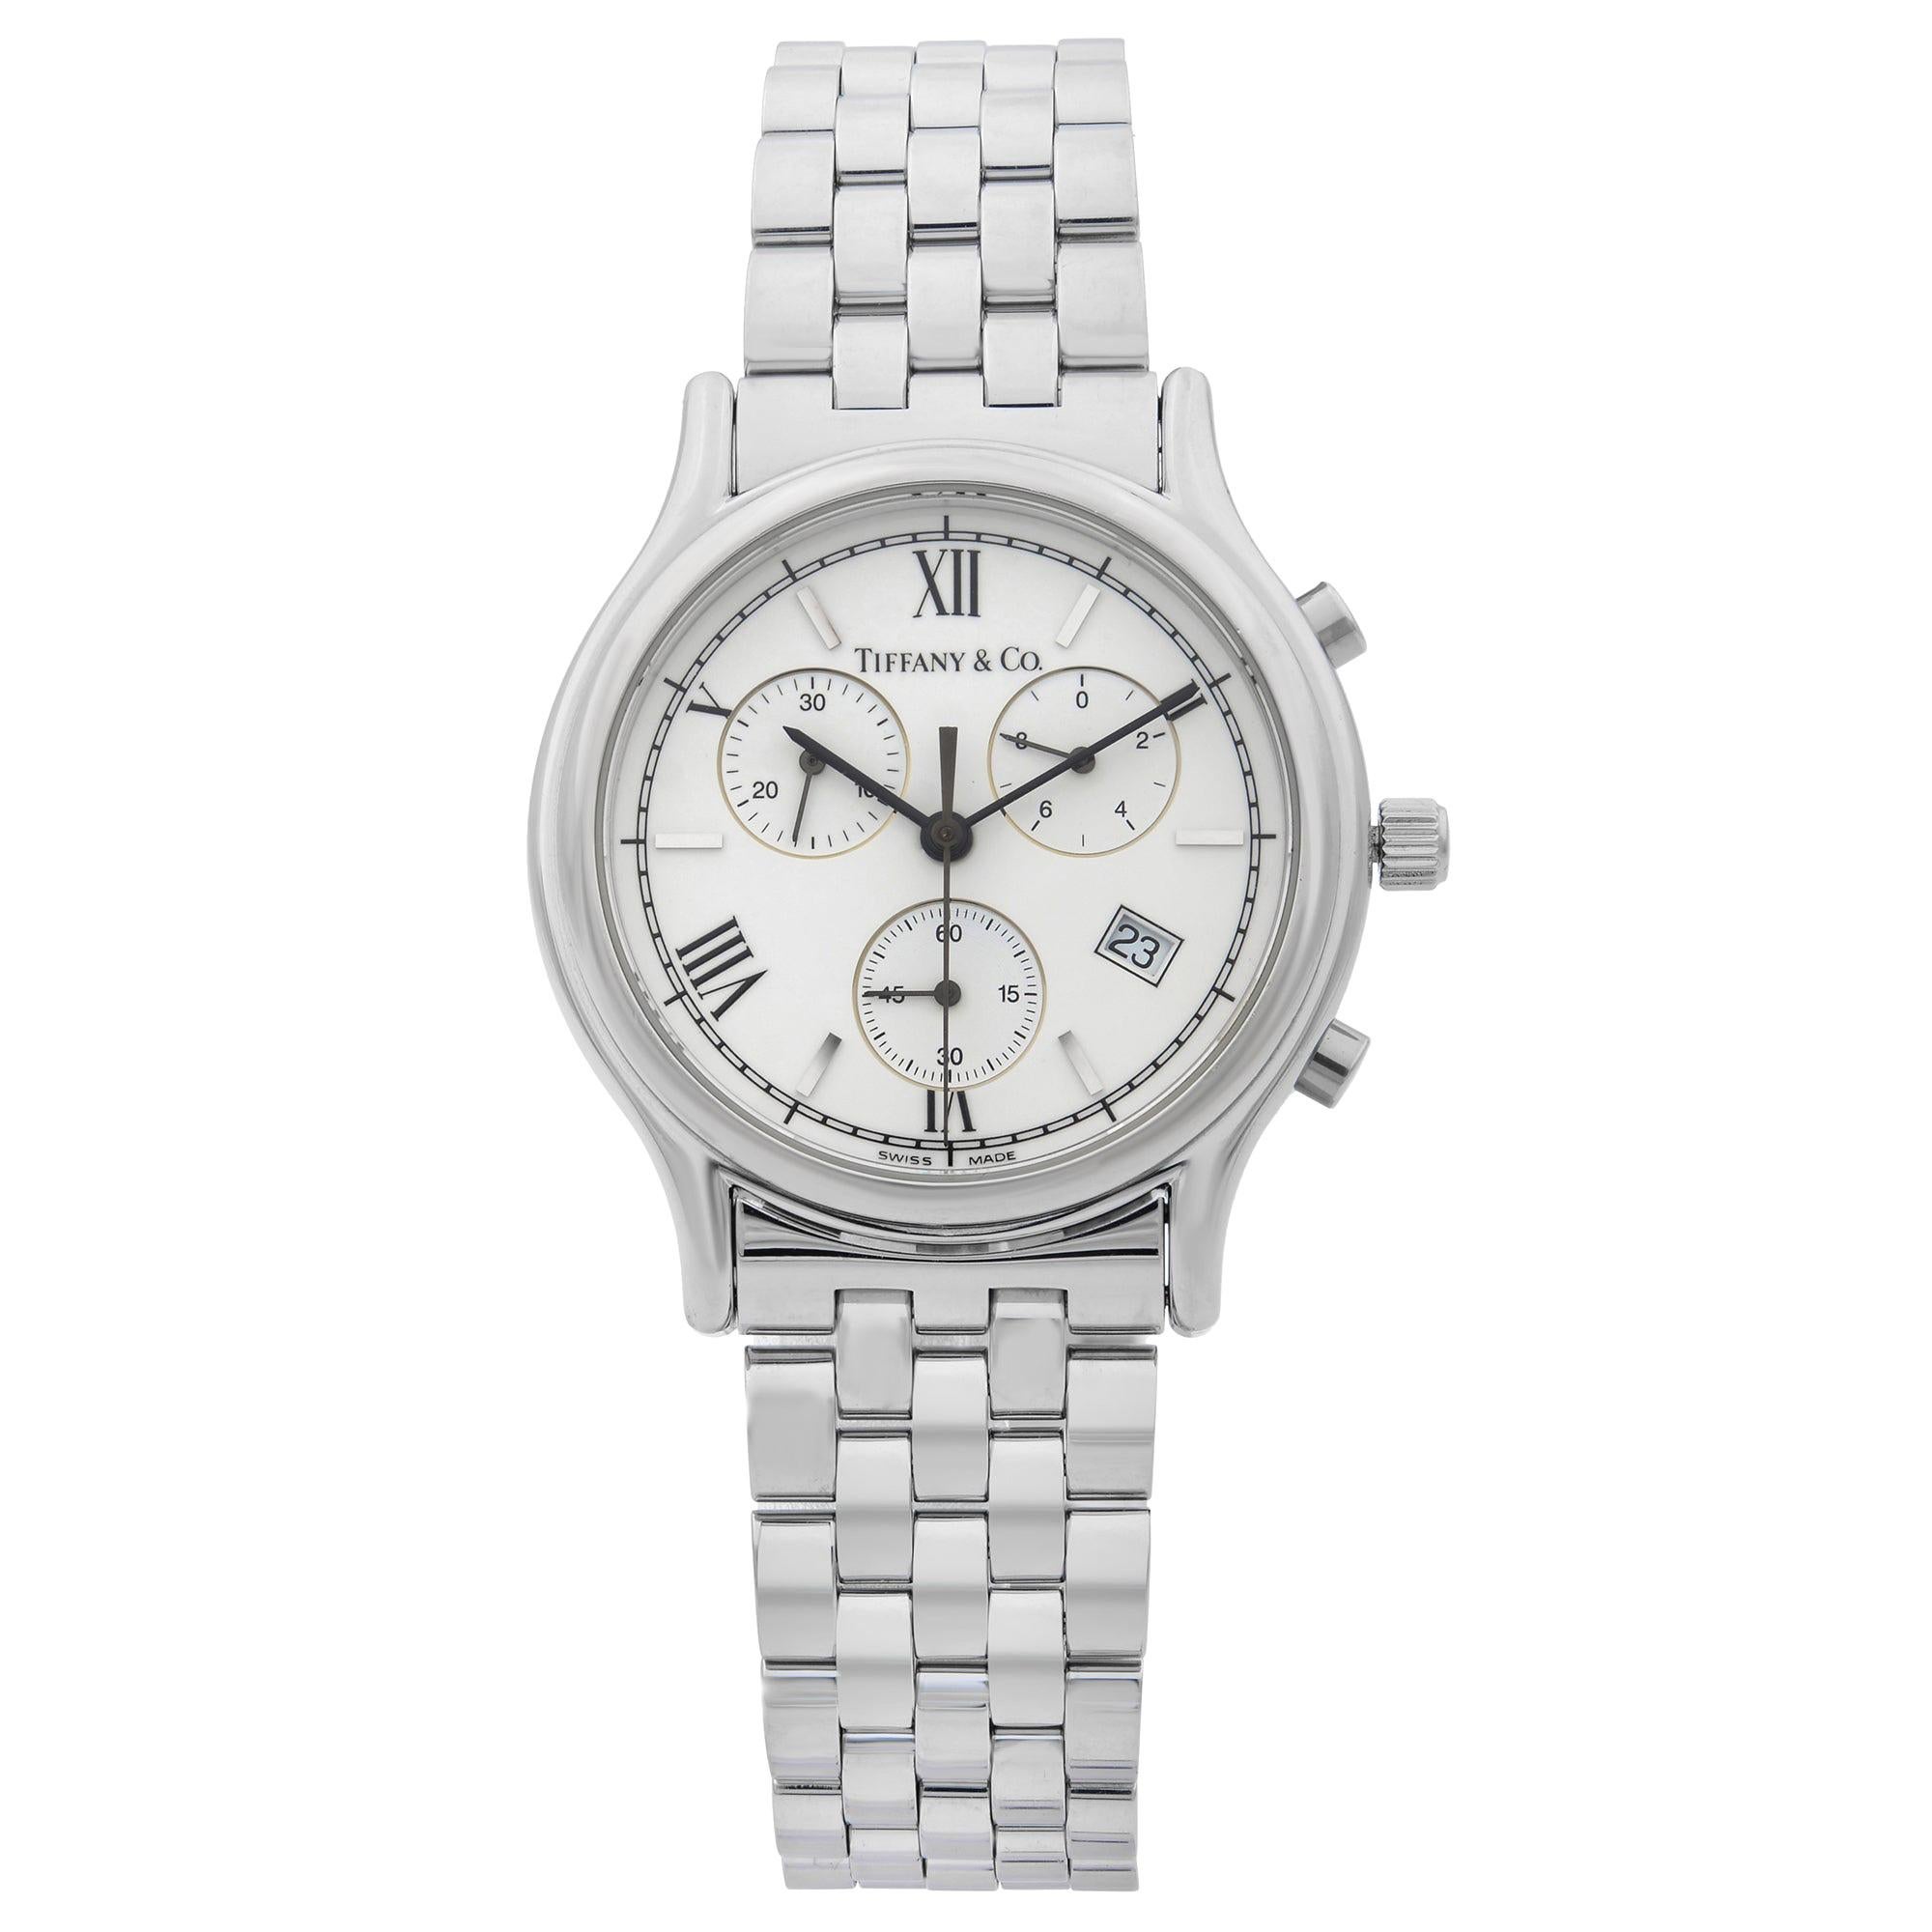 Tiffany & Co. Chronograph Stainless Steel White Dial Vintage Men's Watch